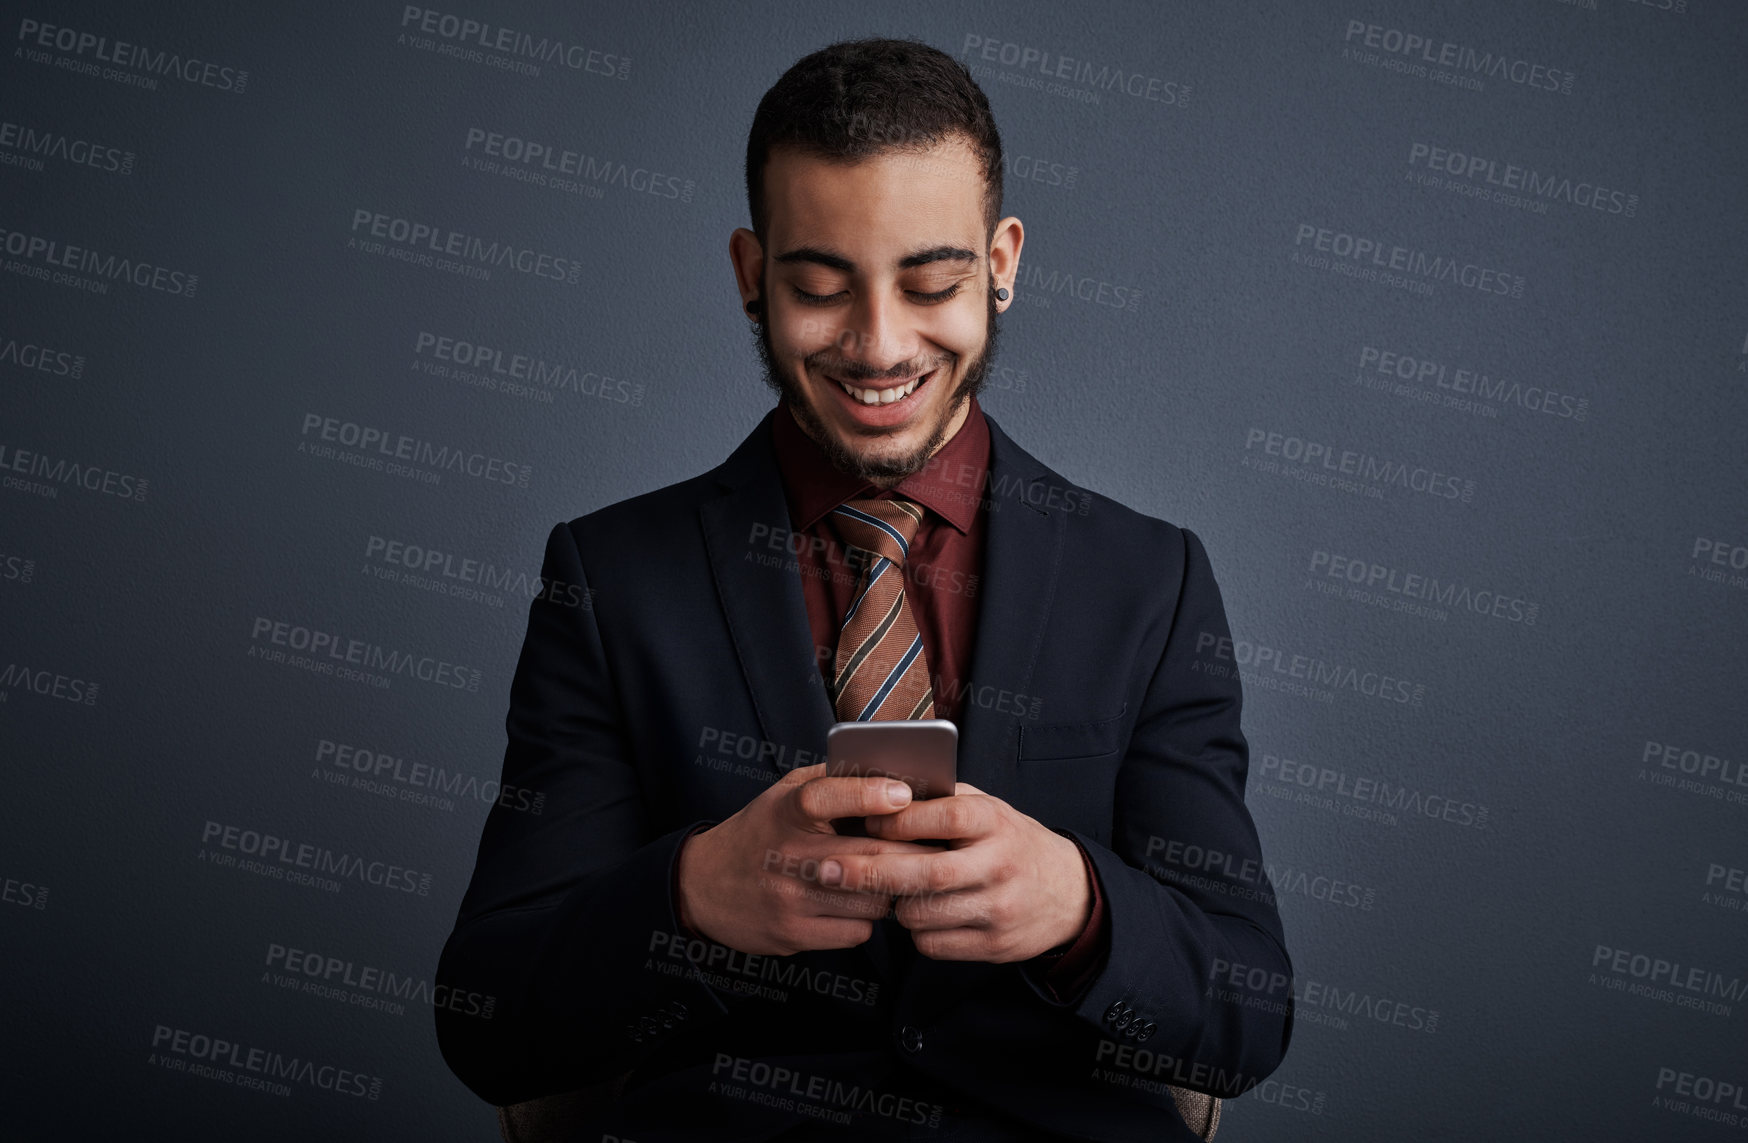 Buy stock photo Studio shot of a stylish young businessman sending a text message while standing against a gray background